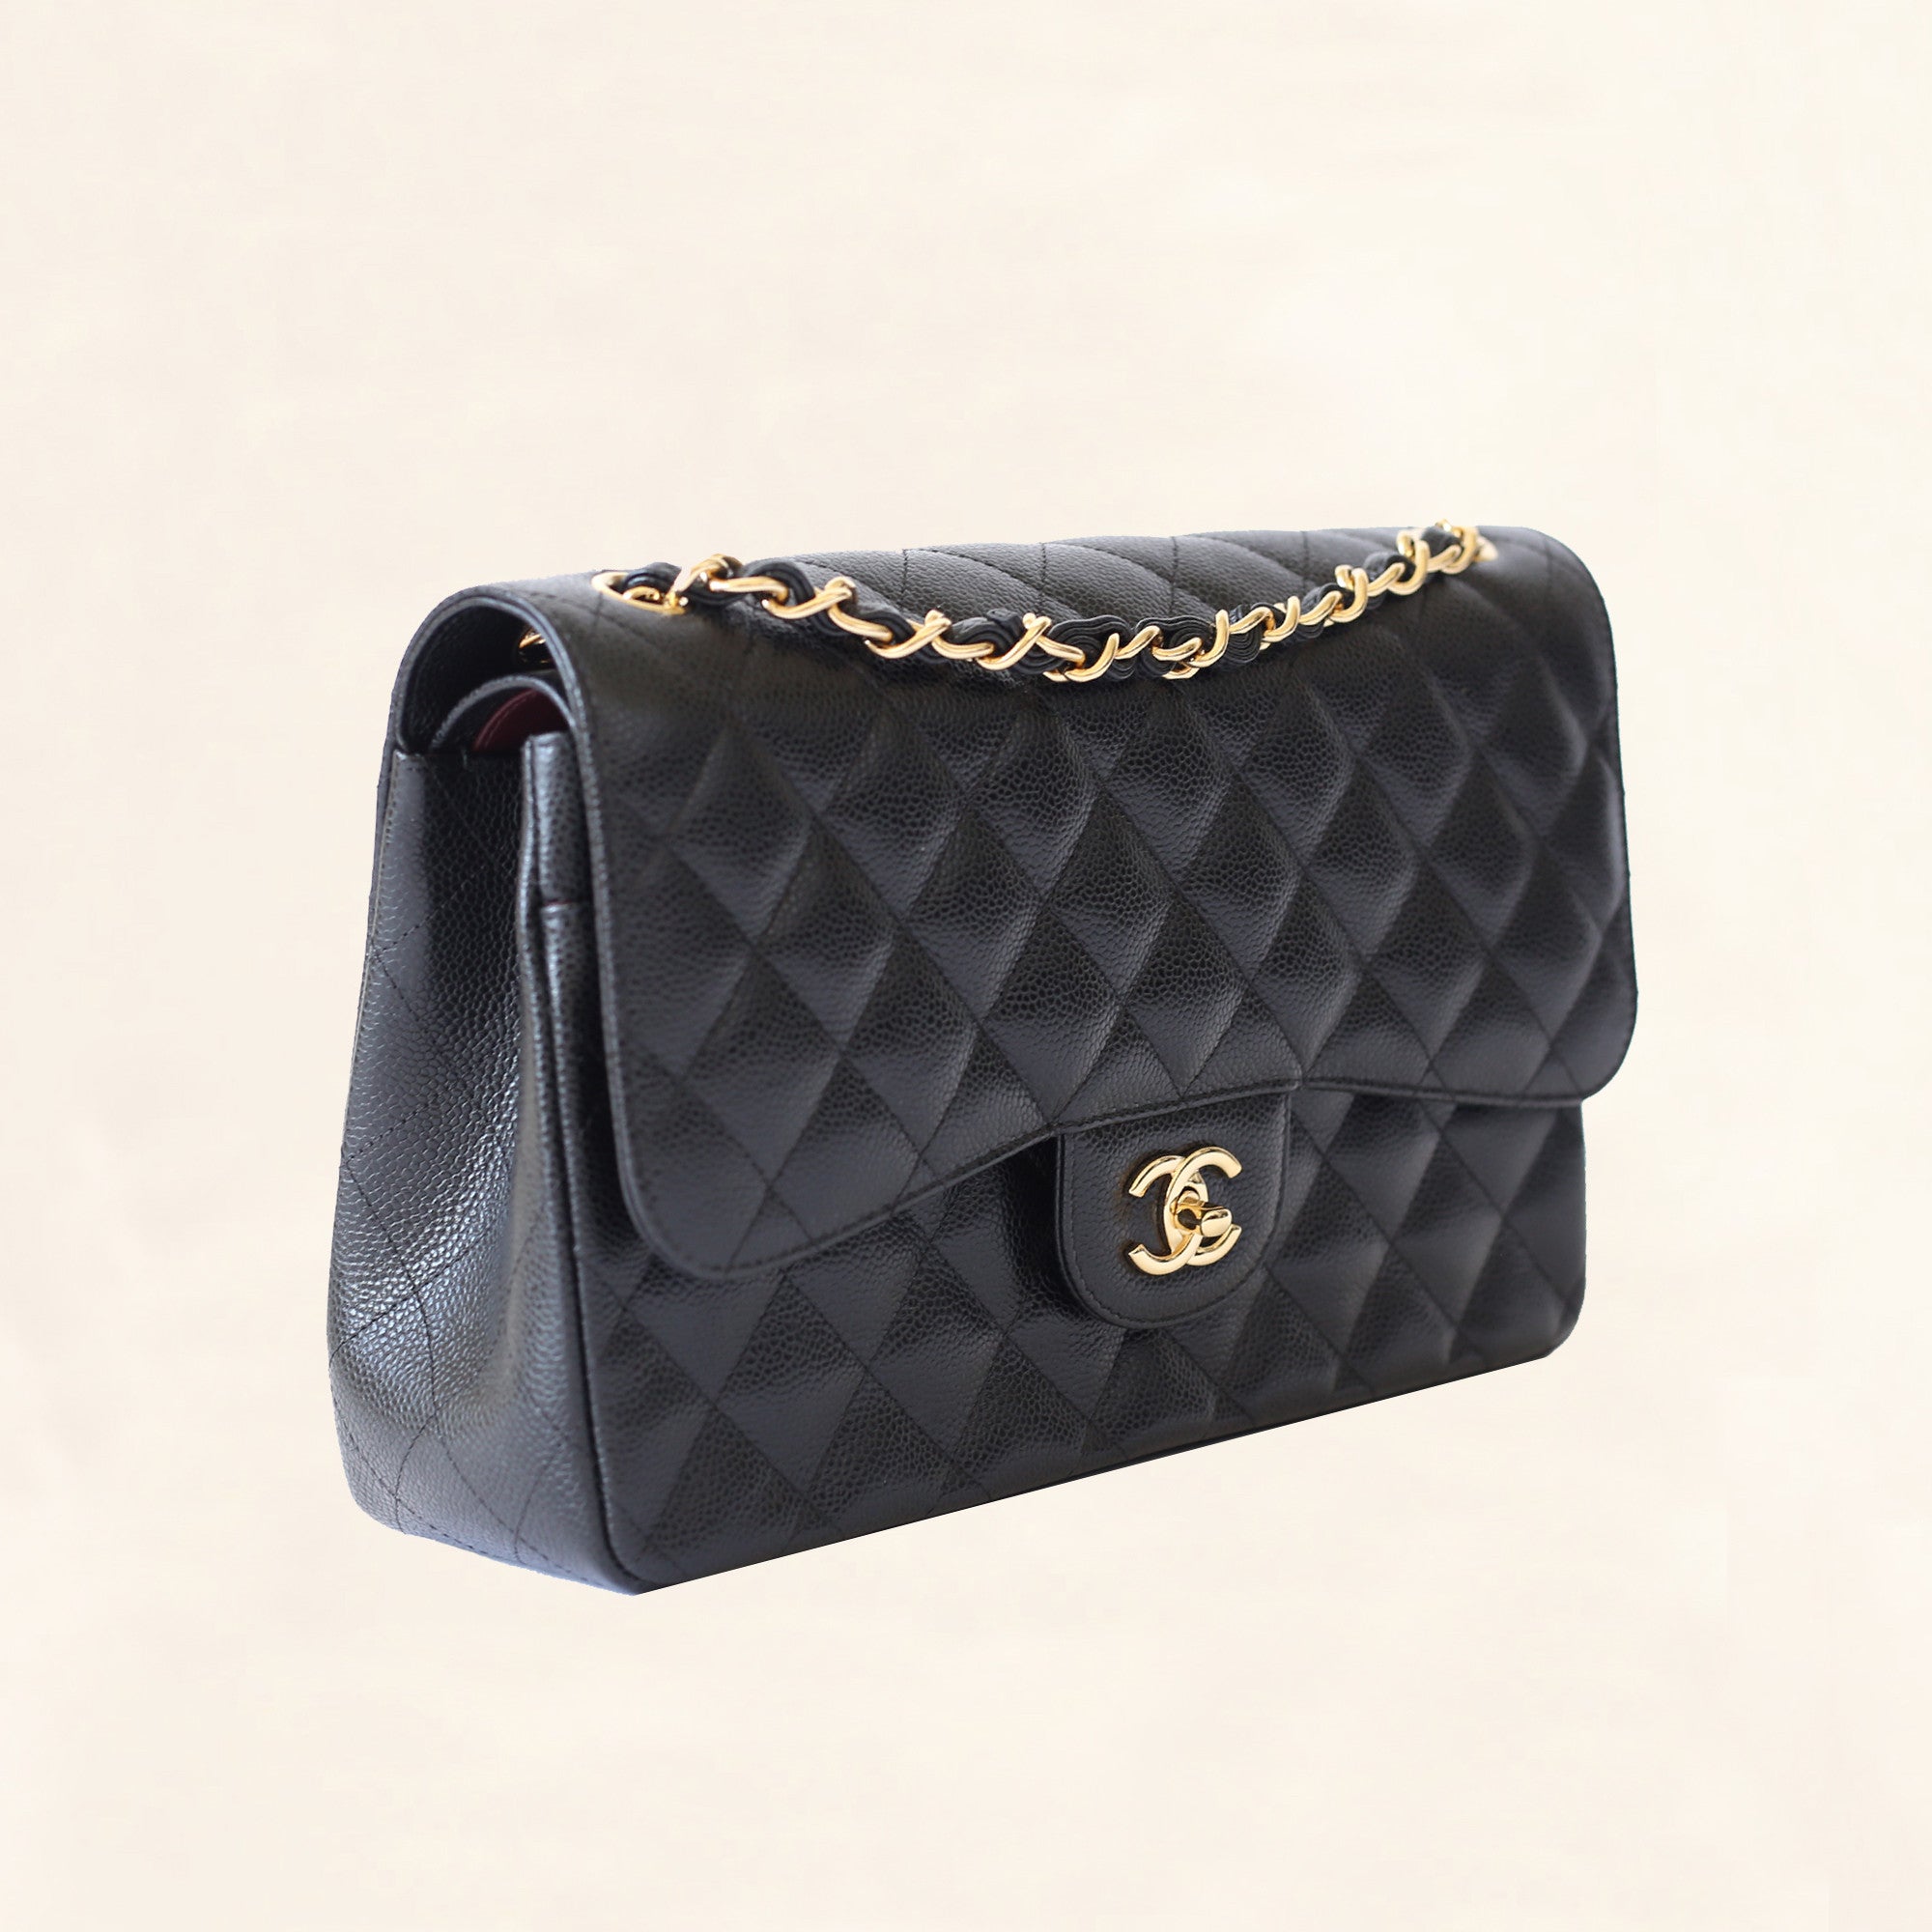 gold chanel pouch black